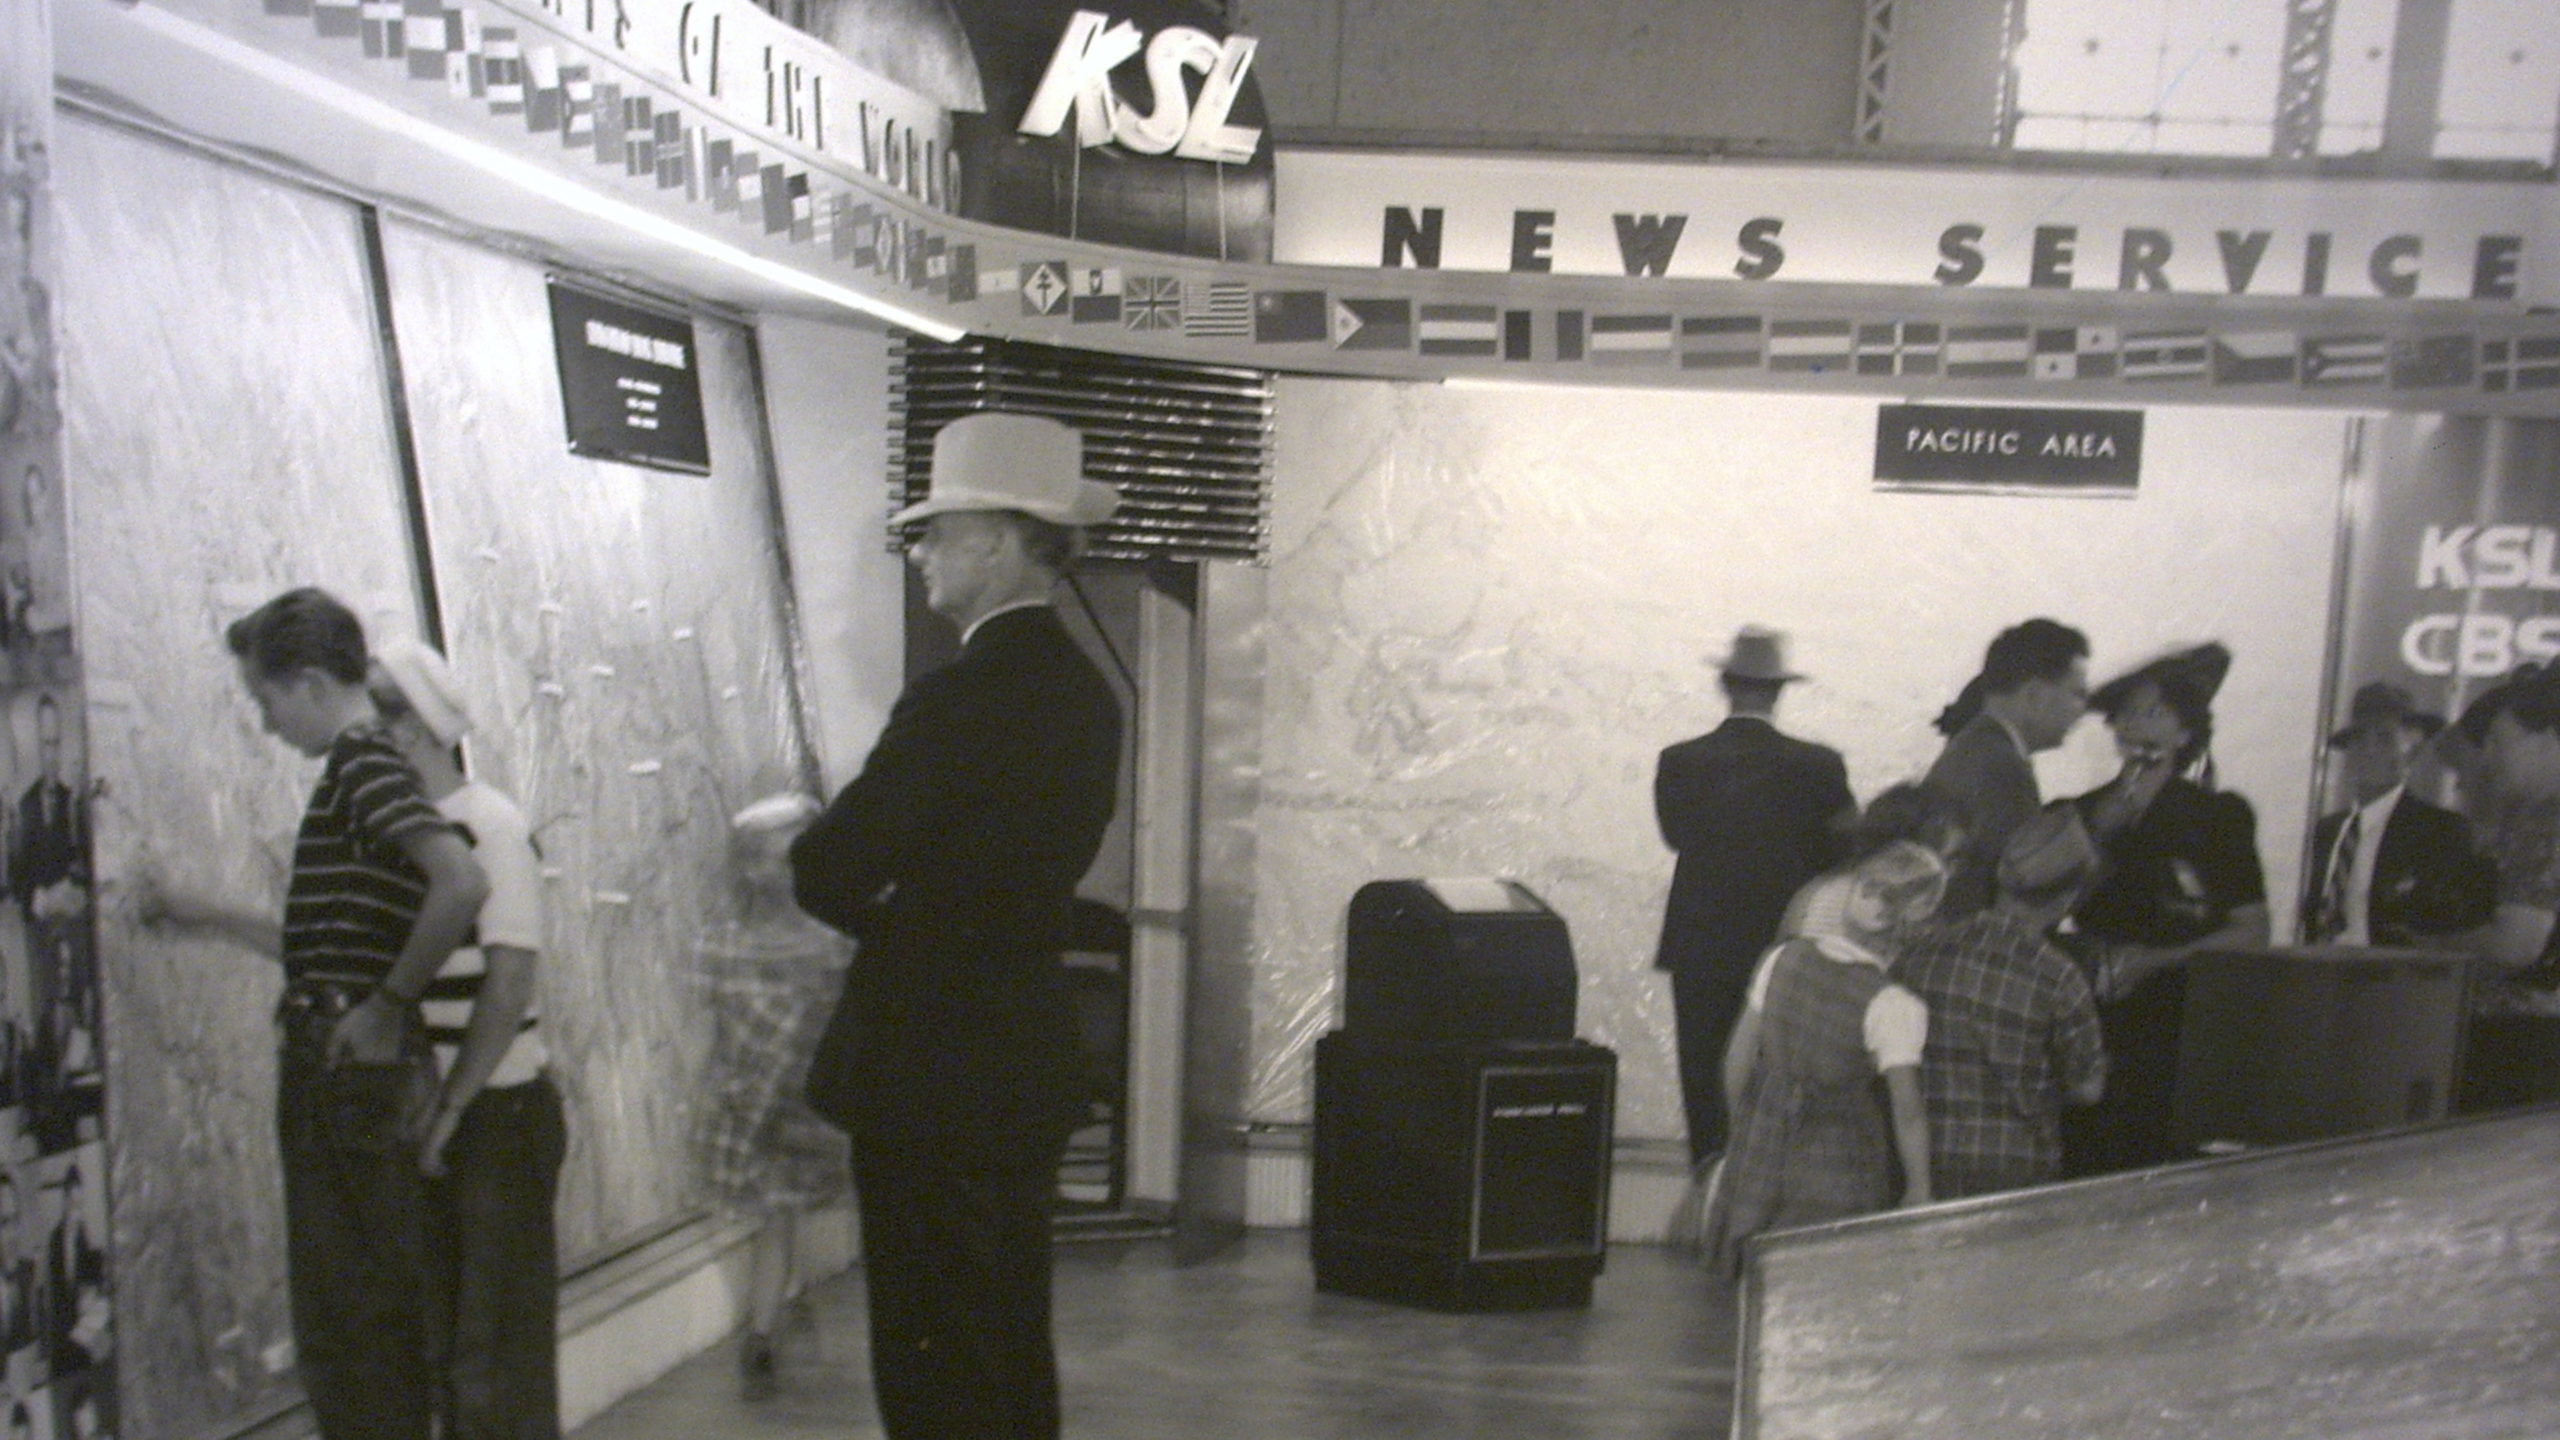 Throwback photo of KSL news service stand...